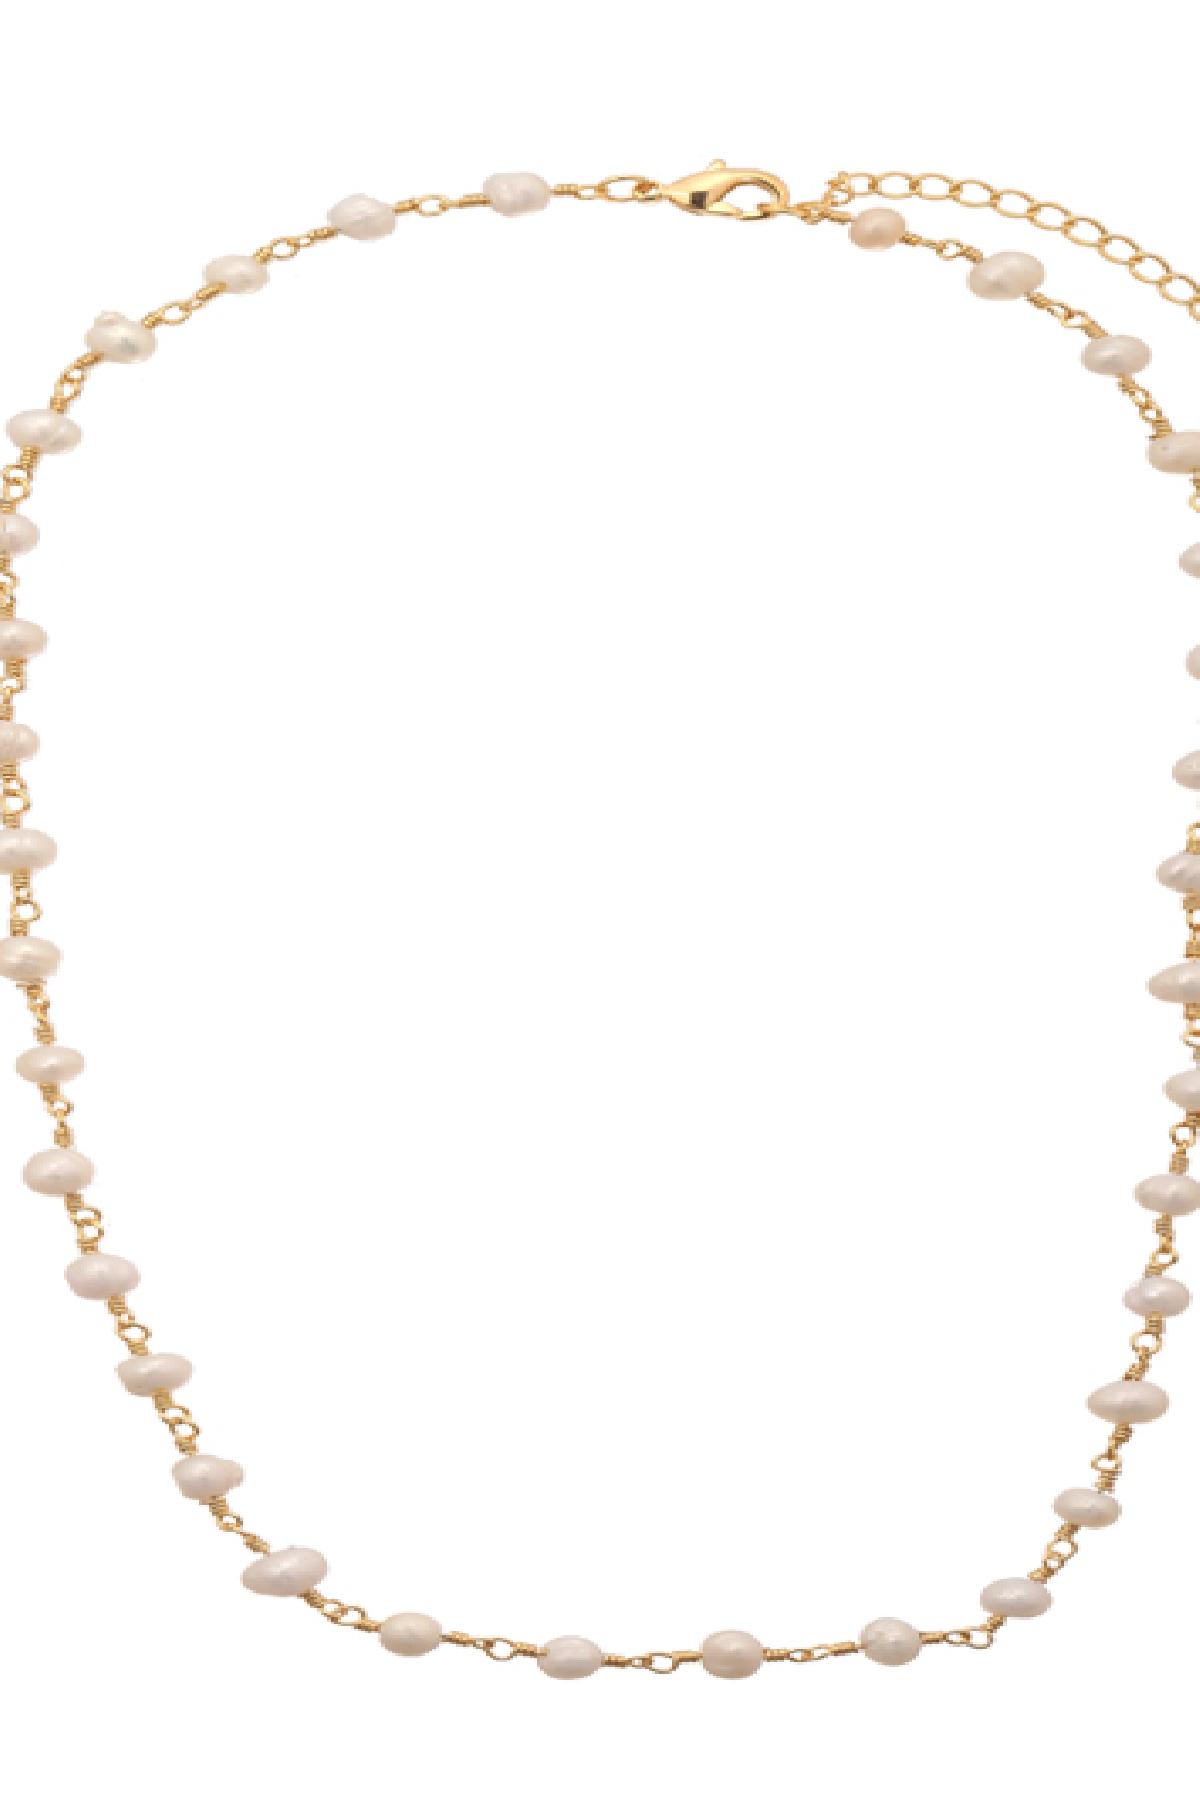 Necklace Chain of Pearls Gold Gold Plated Picture5